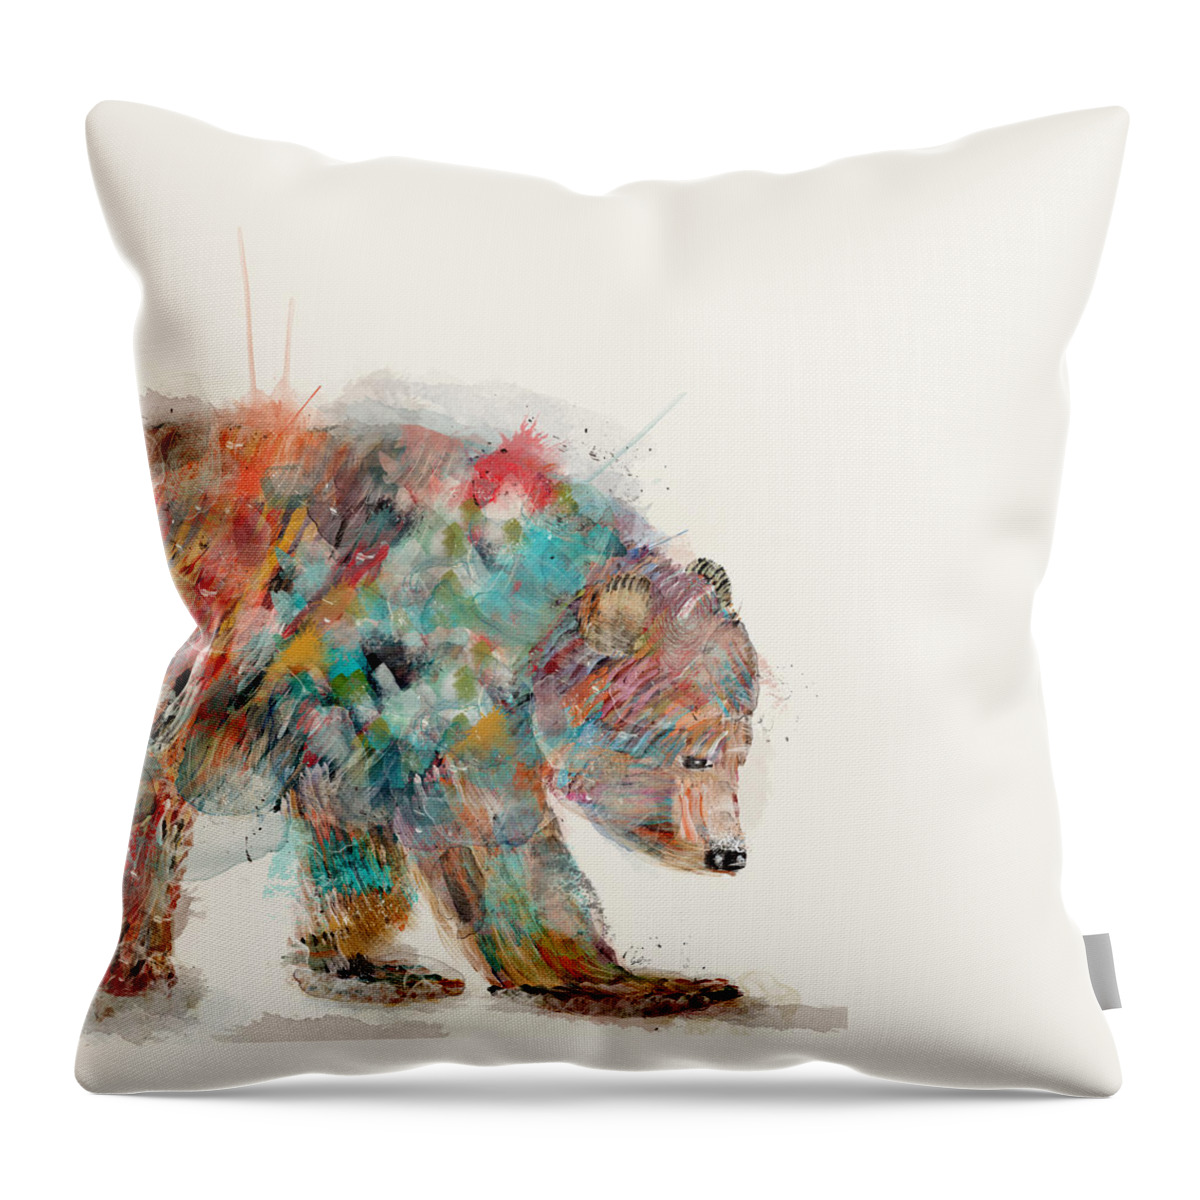 Bears Throw Pillow featuring the painting In Nature Bear by Bri Buckley